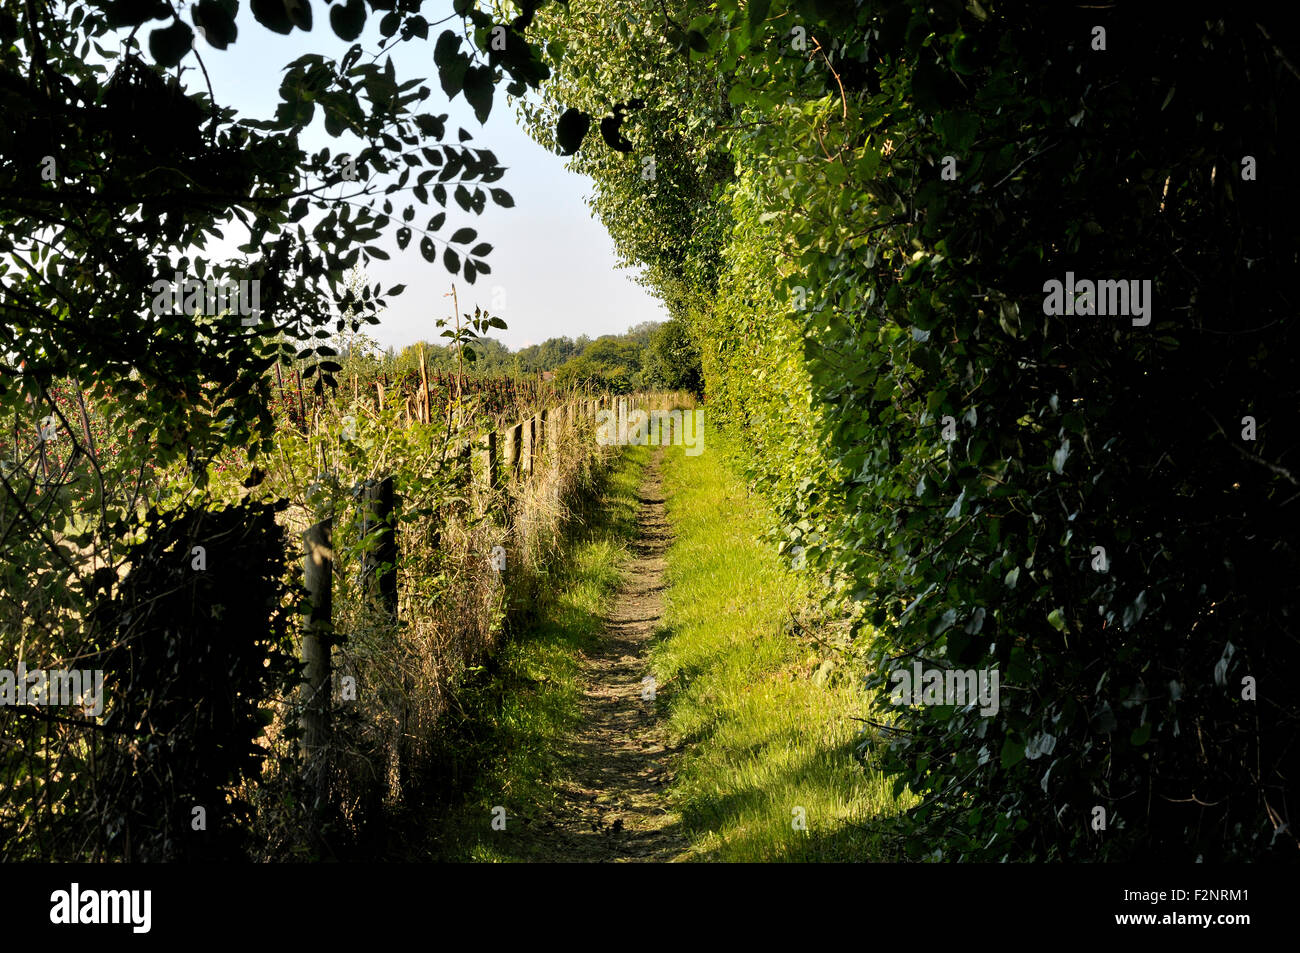 Boughton Monchelsea village, Maidstone, Kent, UK. Public footpath between a large hedge and an orchard Stock Photo